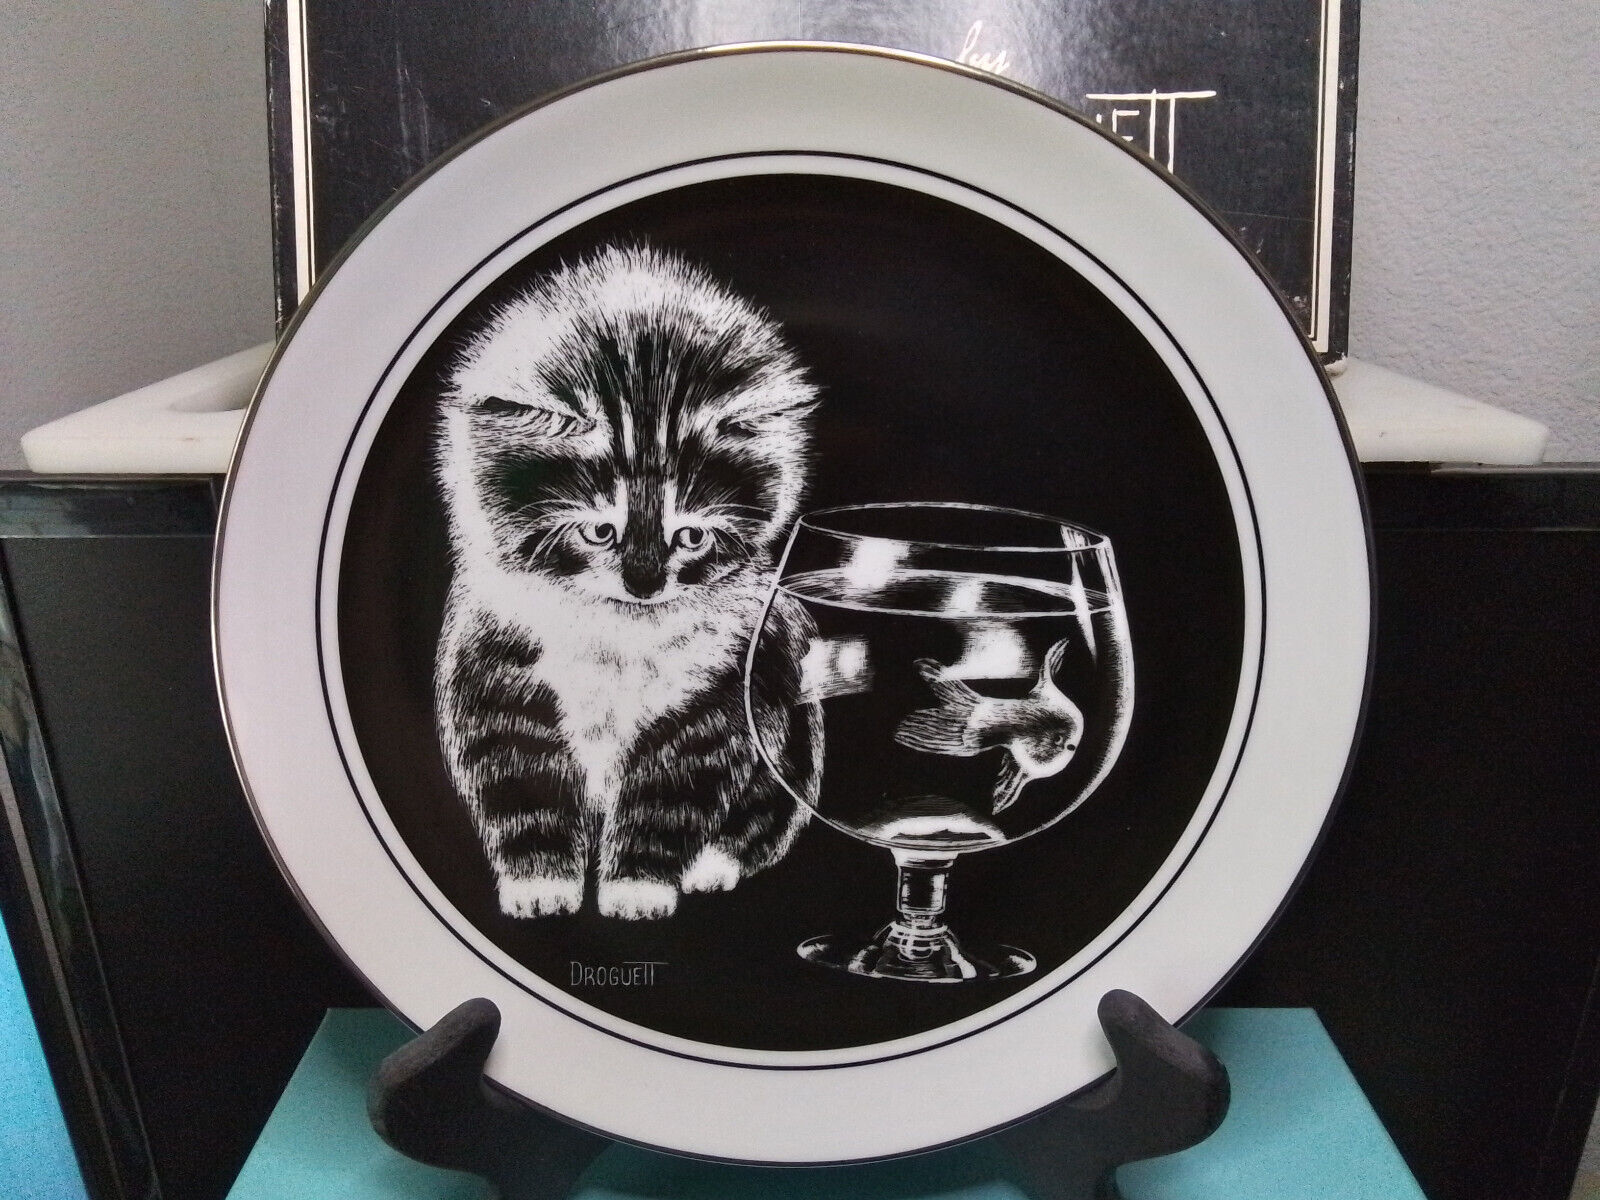 Kittens World by Droguett (1979) Just Curious Plate Only 20306/27500